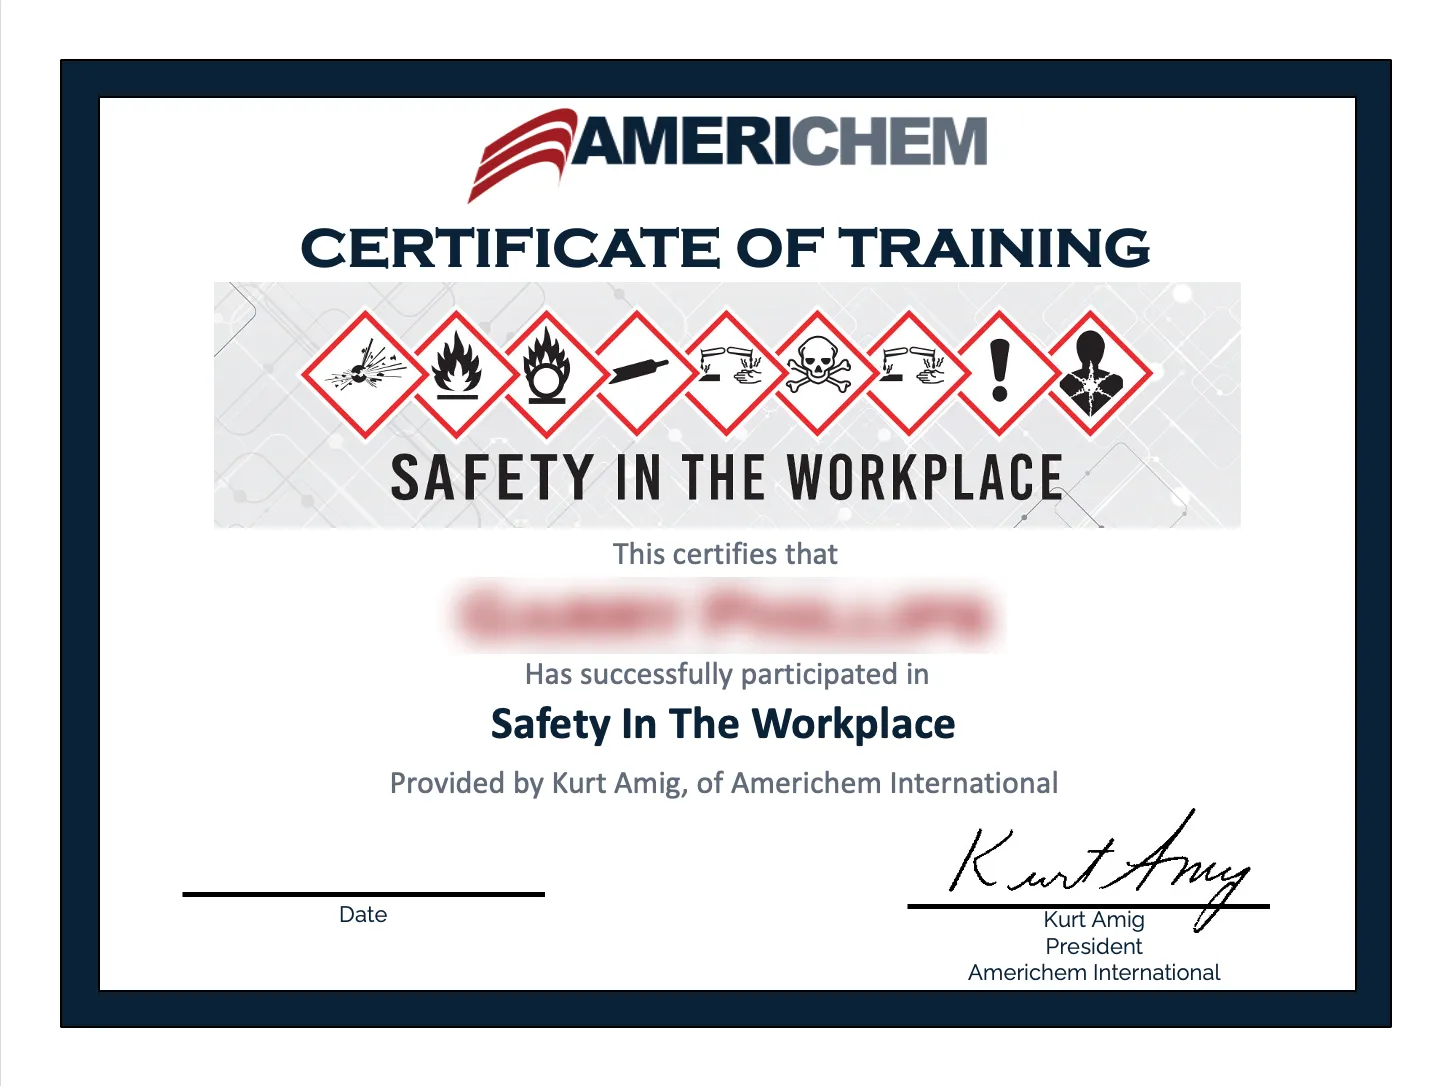 Safety in Workplace